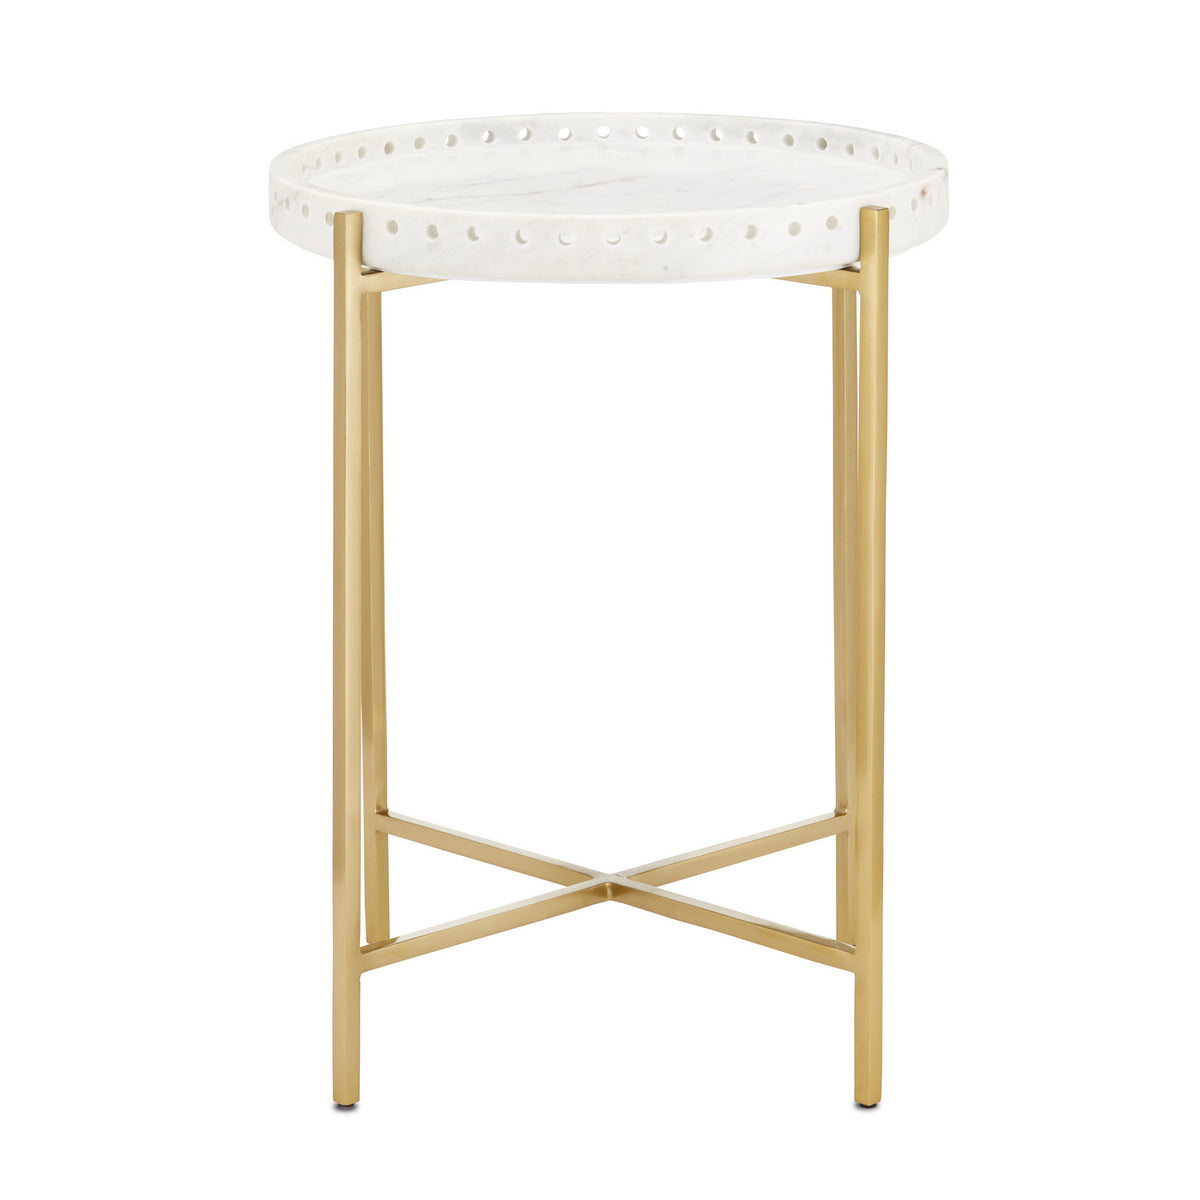 Currey and Company - 4000-0146 - Accent Table - Freya - White/Antique Brass